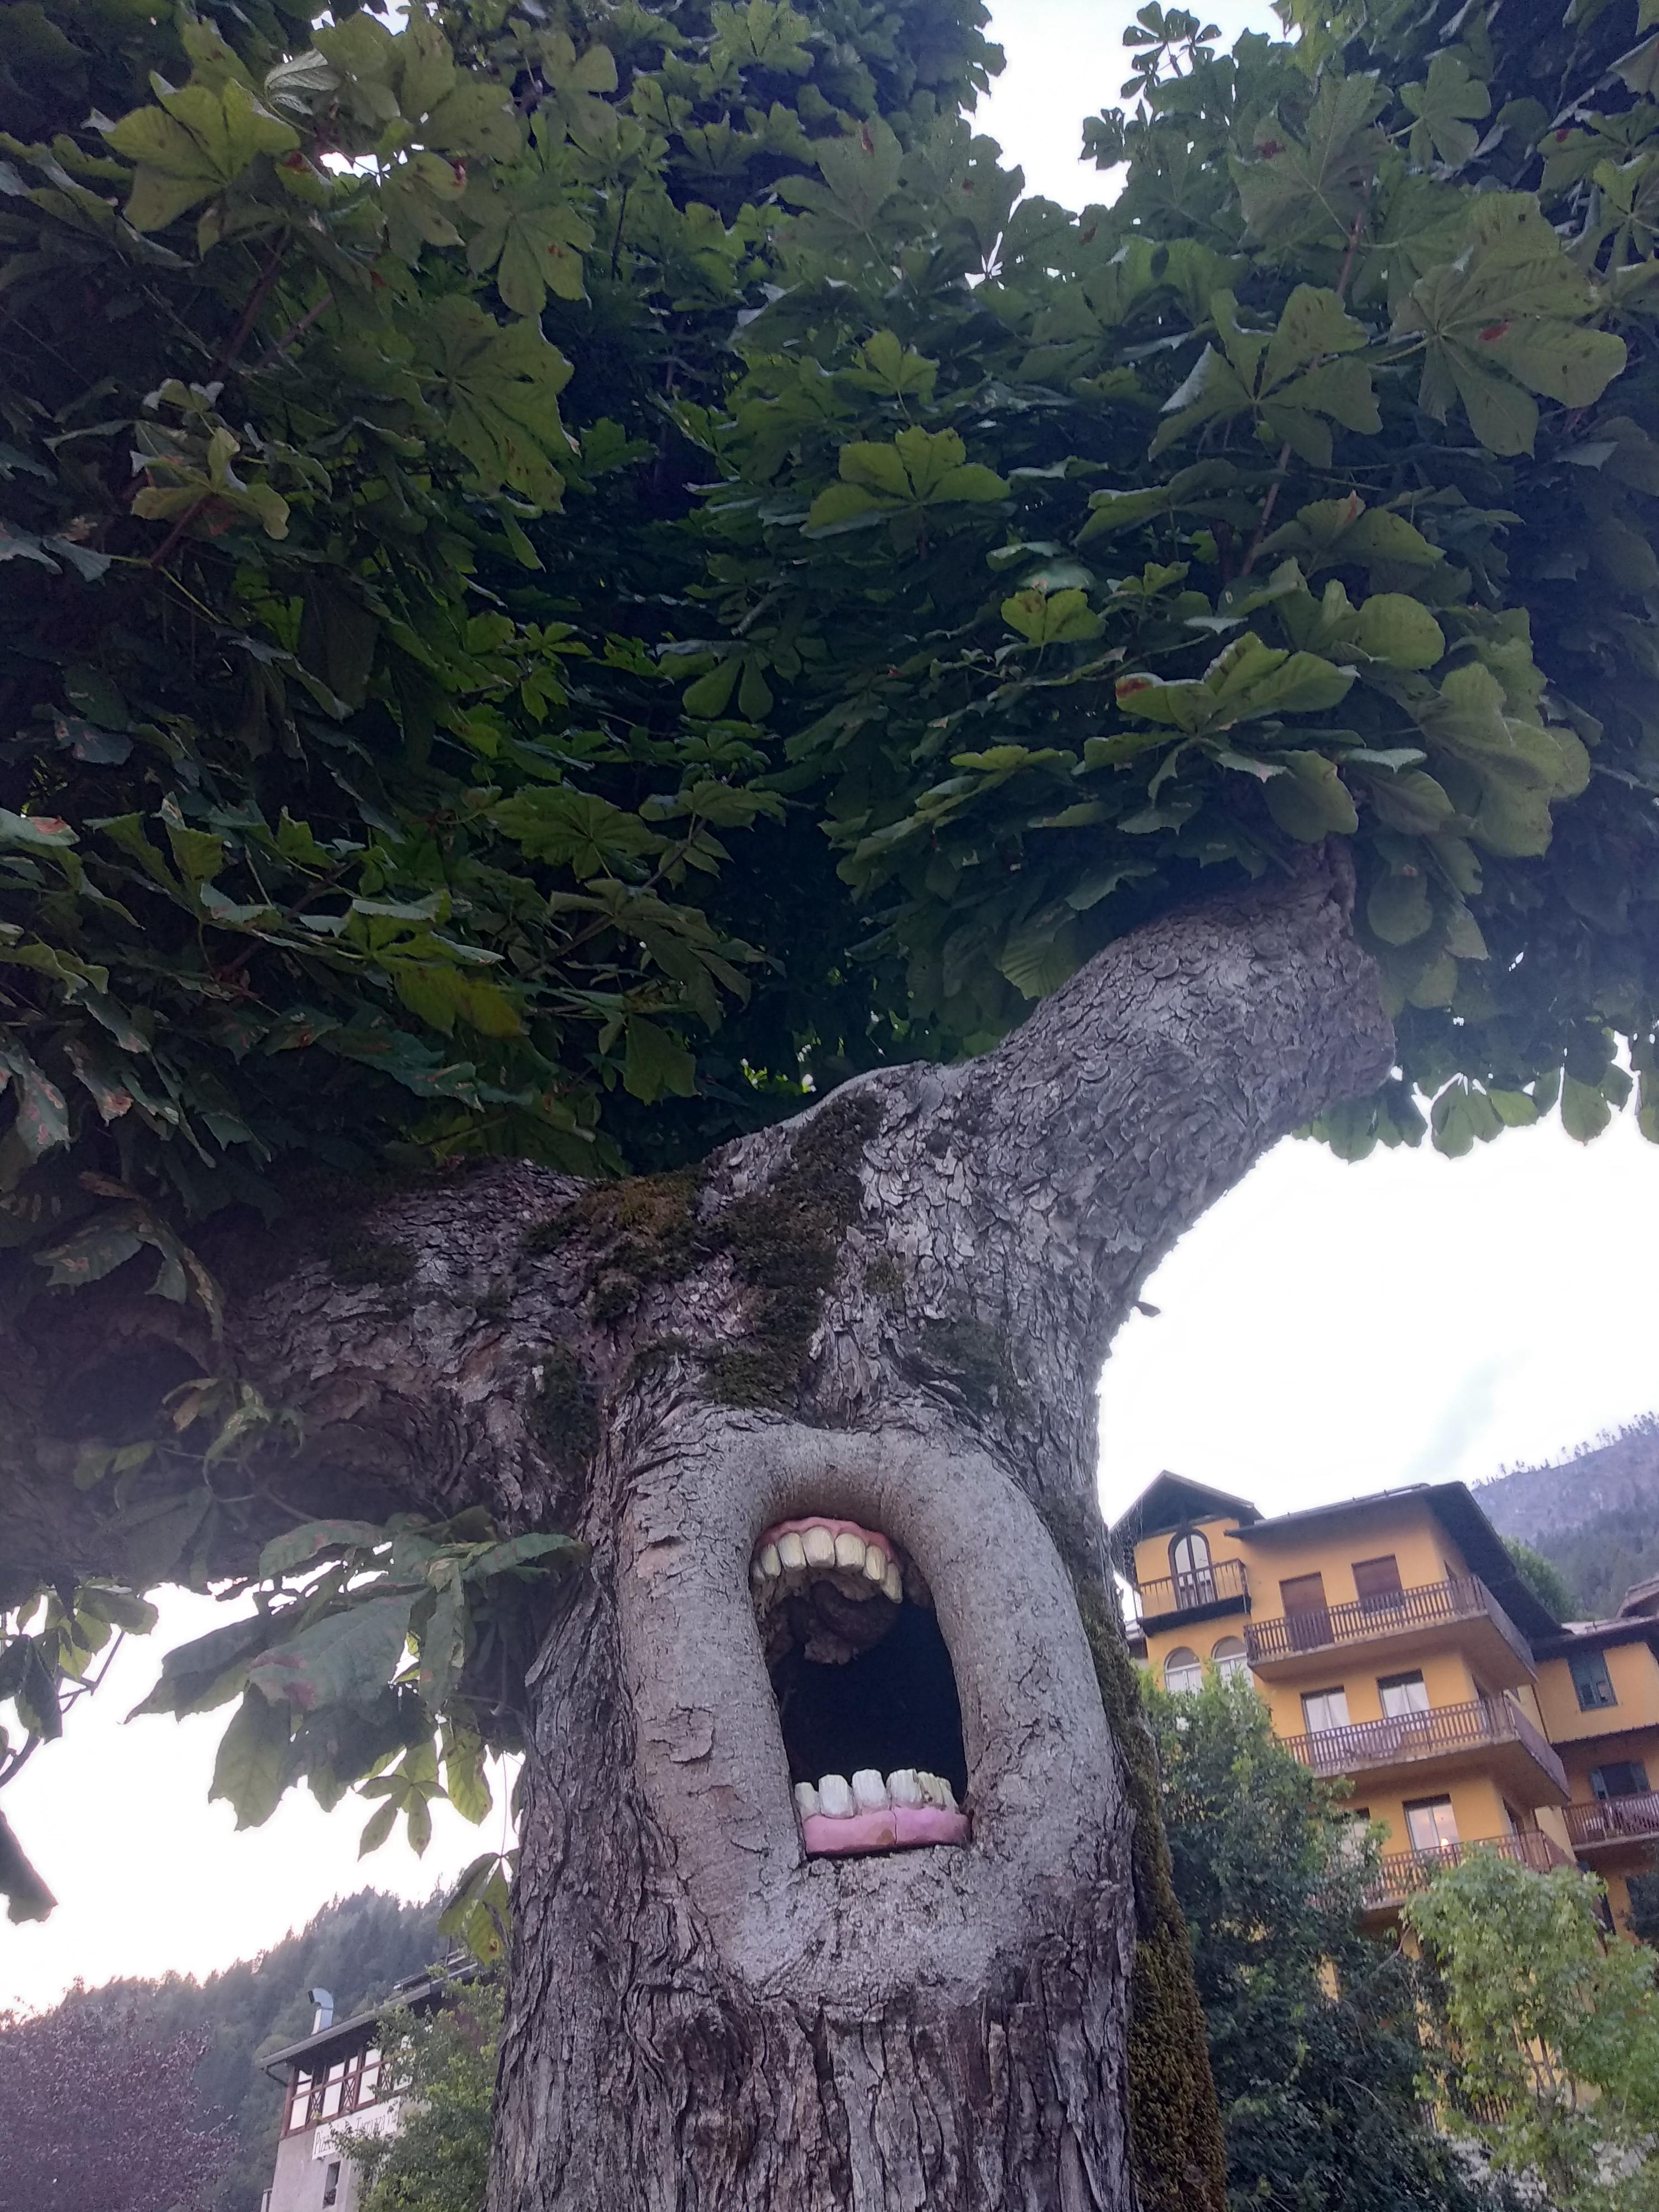 The Ents are not pleased...